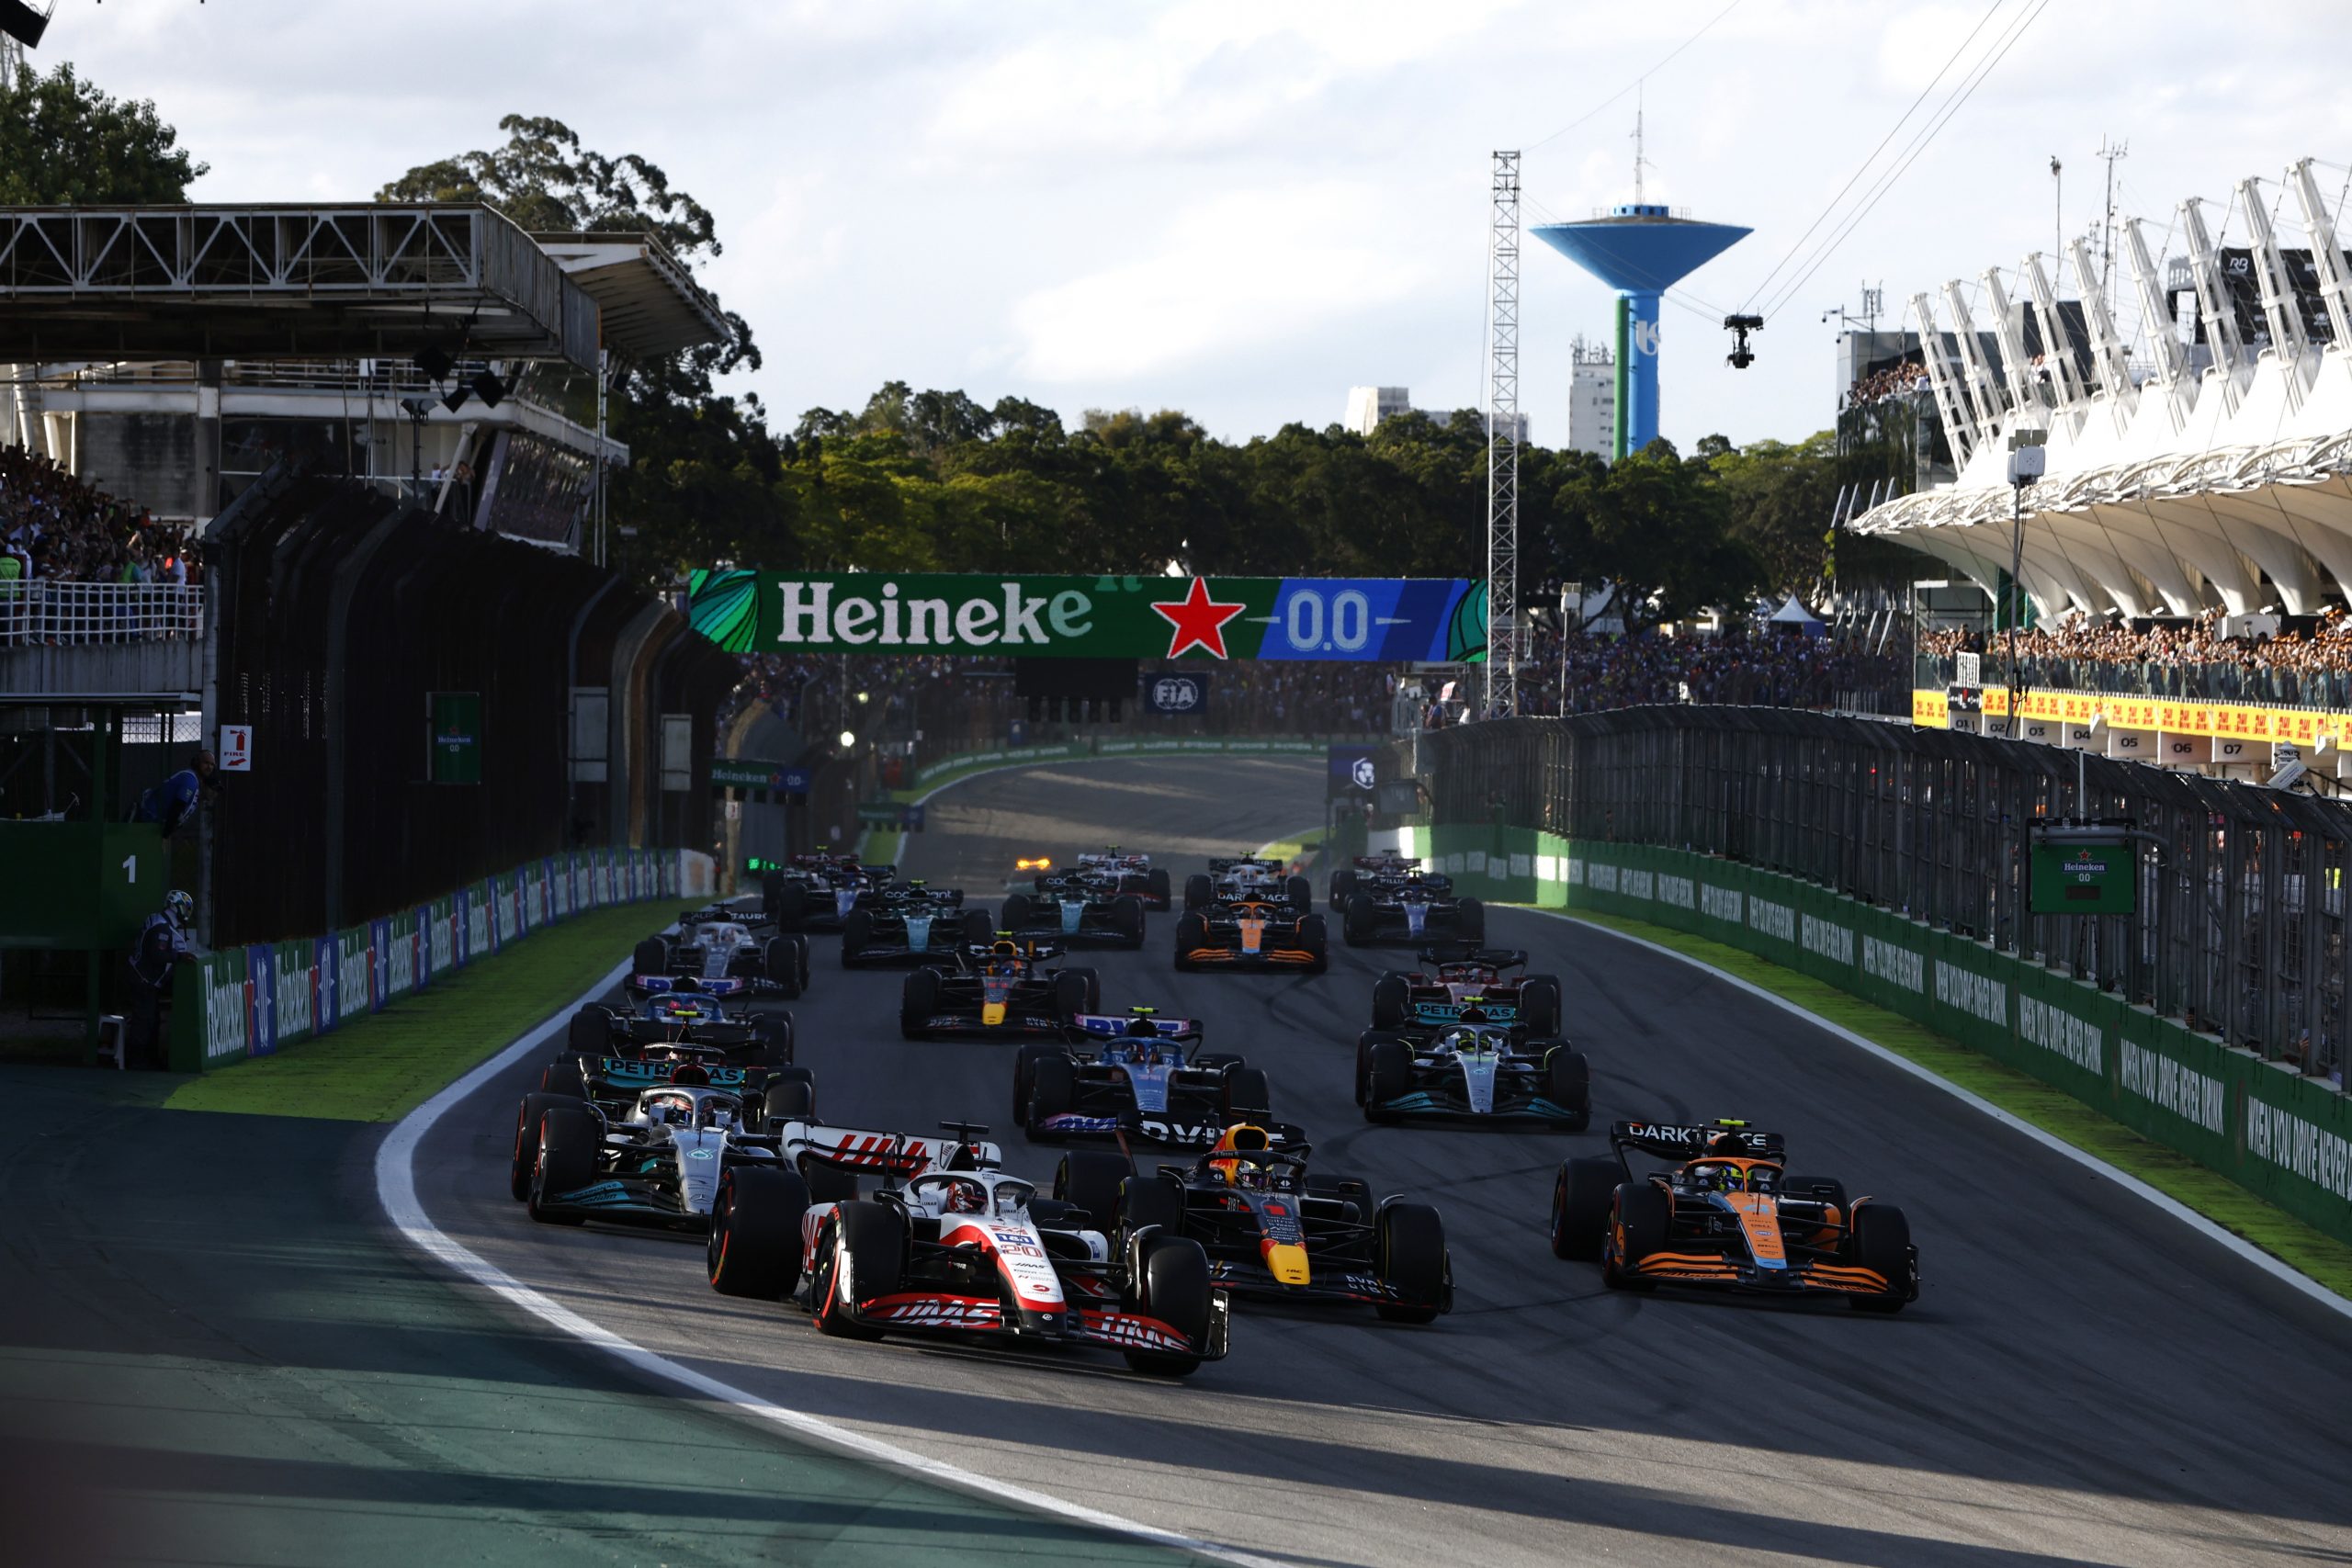 AUTóDROMO JOSé CARLOS PACE, BRAZIL - NOVEMBER 12: Kevin Magnussen, Haas VF-22, leads Max Verstappen, Red Bull Racing RB18, Lando Norris, McLaren MCL36, George Russell, Mercedes W13, Esteban Ocon, Alpine A522, and the rest of the field at the start during the São Paulo GP at Autódromo José Carlos Pace on Saturday November 12, 2022 in Sao Paulo, Brazil. (Photo by Zak Mauger / LAT Images)